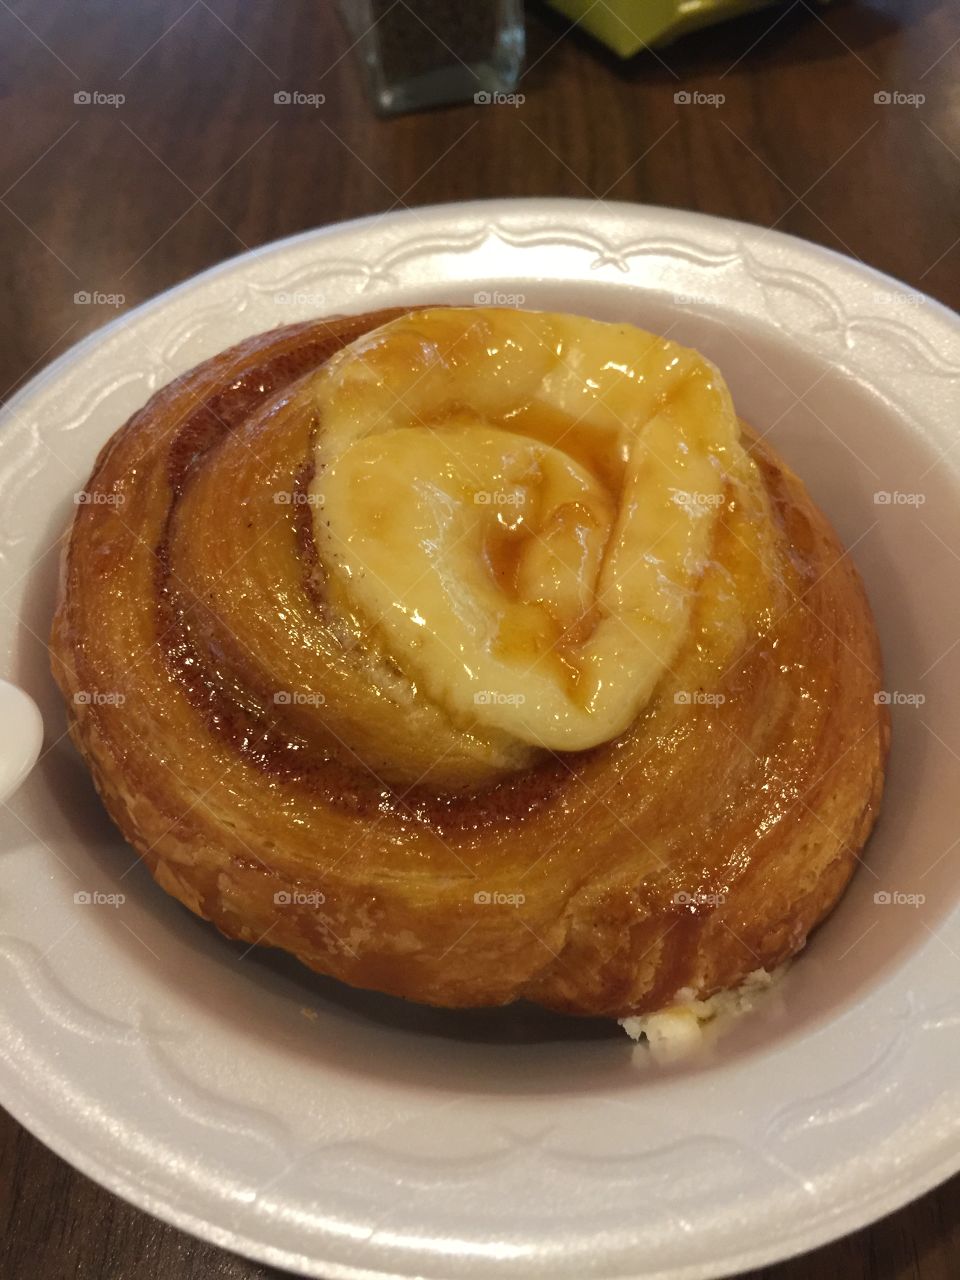 Awesome breakfast pastry